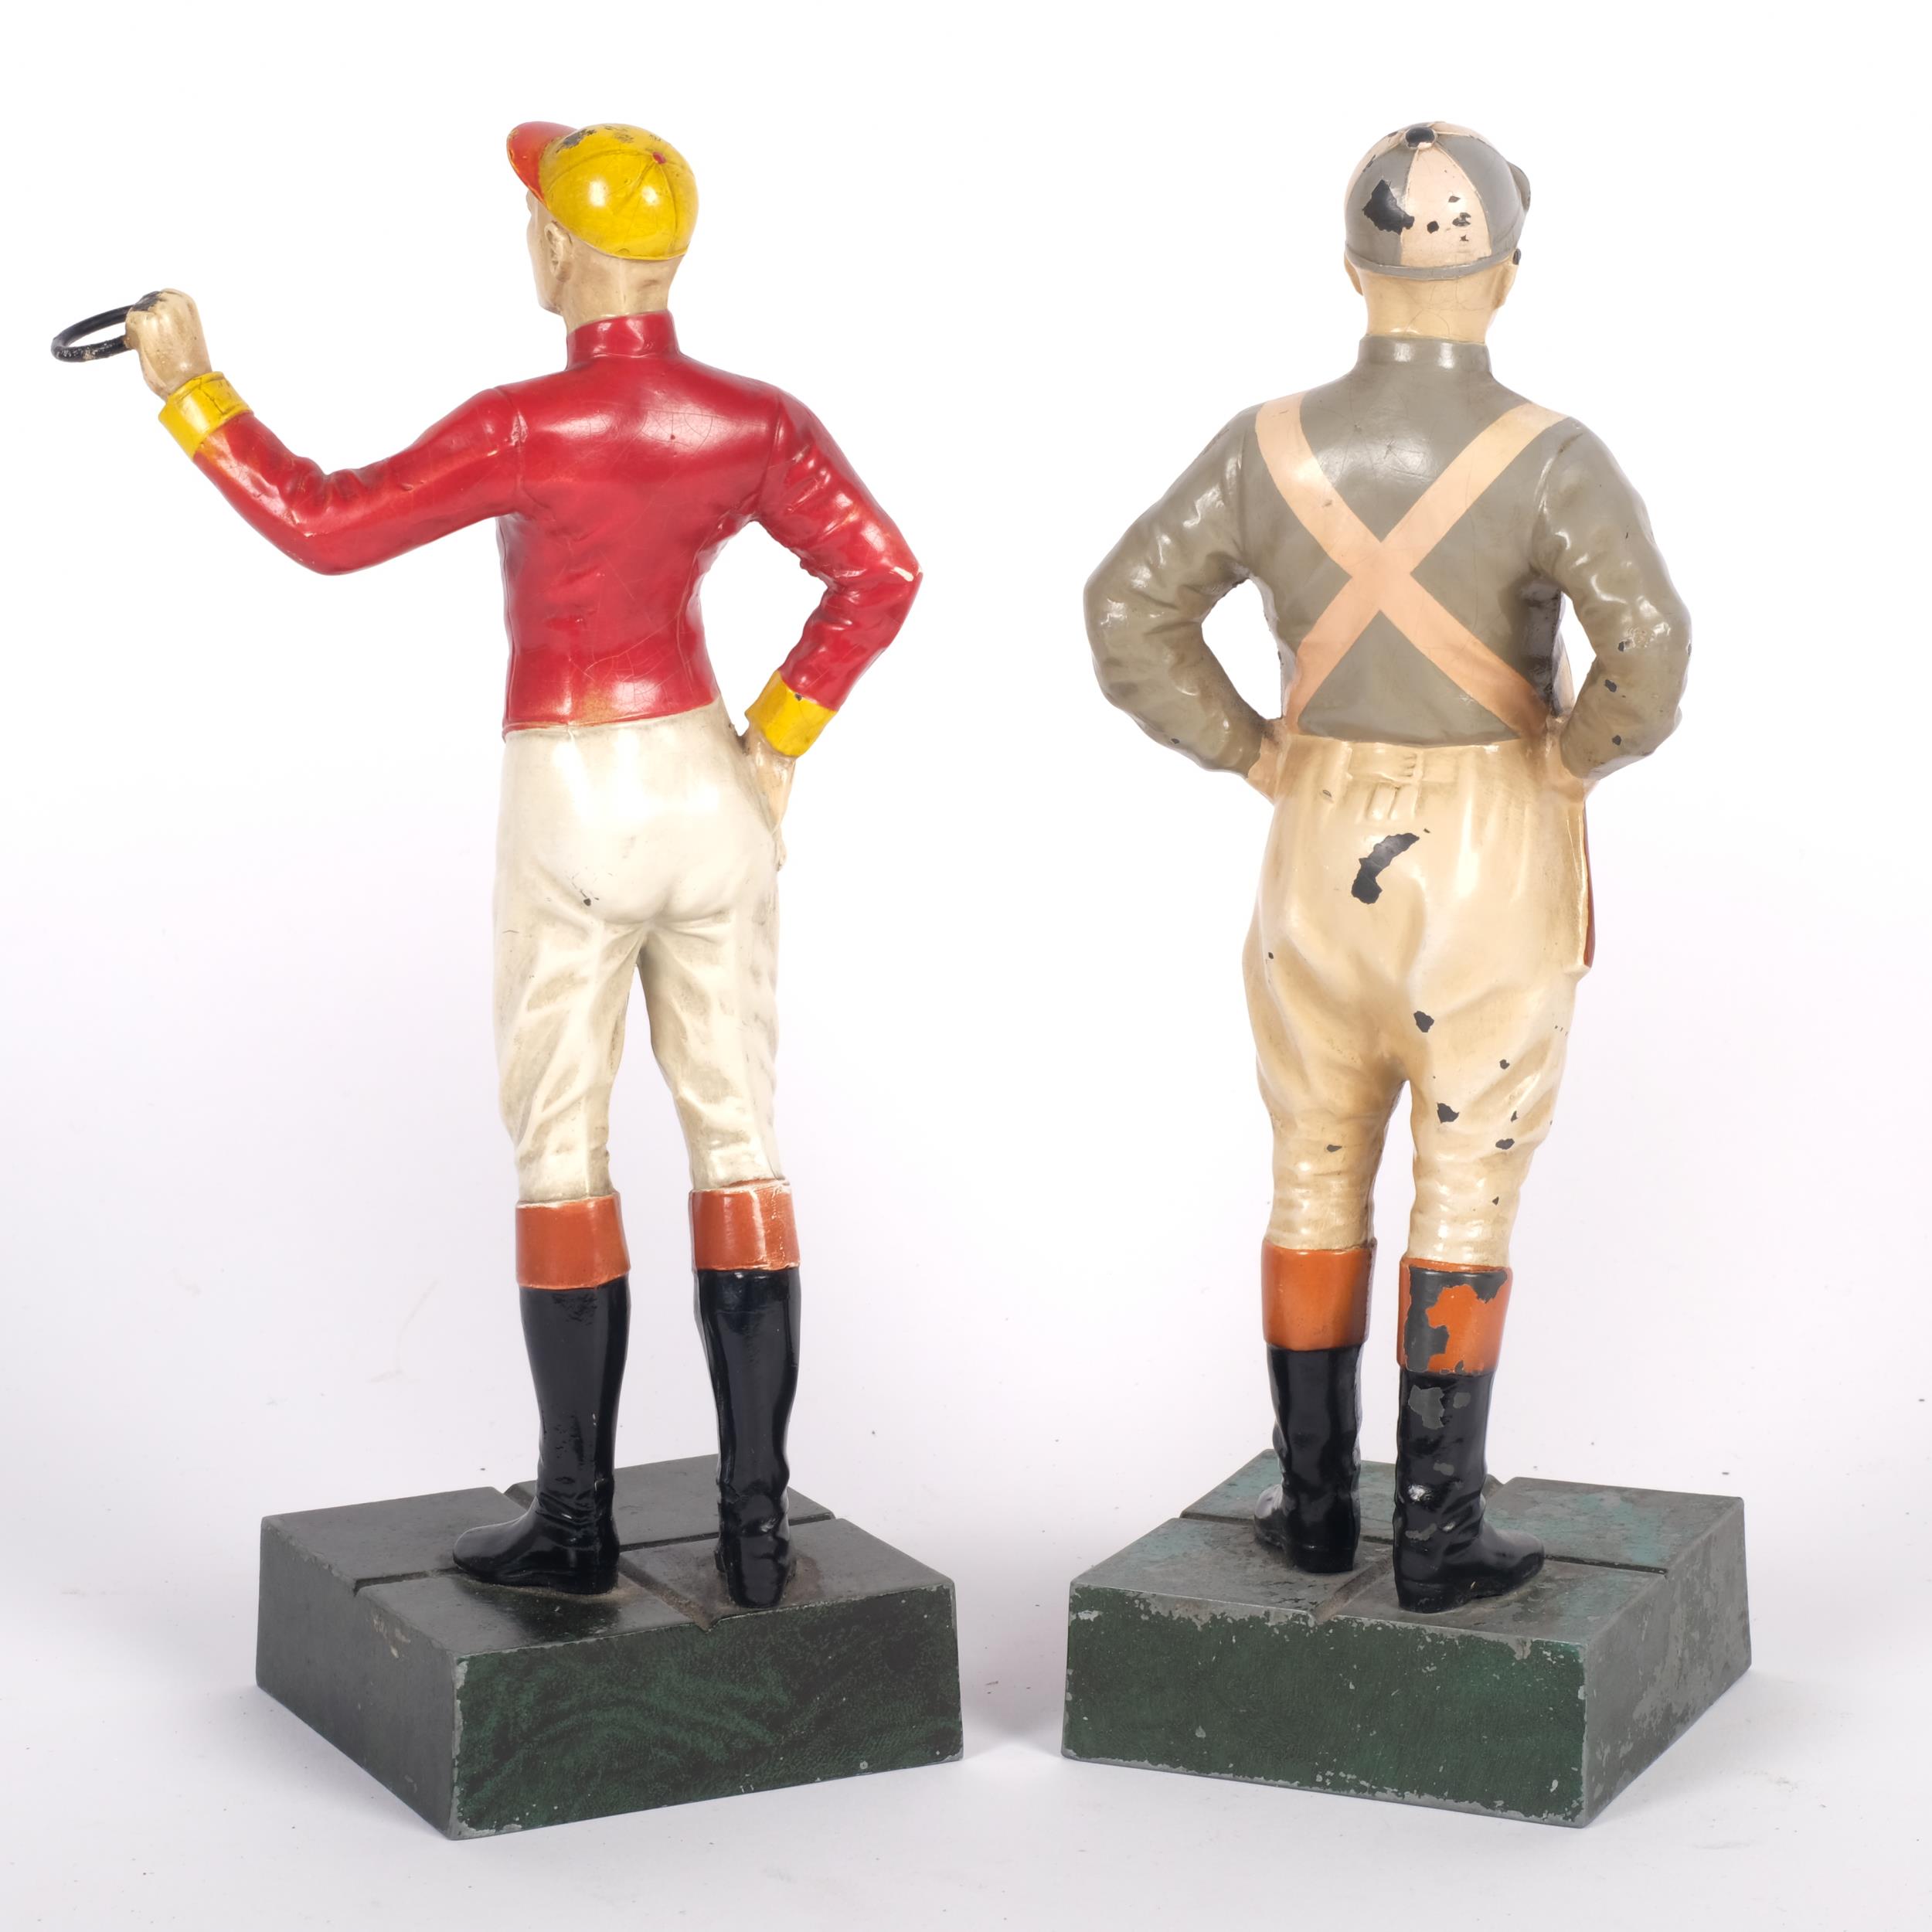 2 cold painted cast-metal figures, study of jockeys, on plinth bases, overall height 26cm - Image 2 of 2